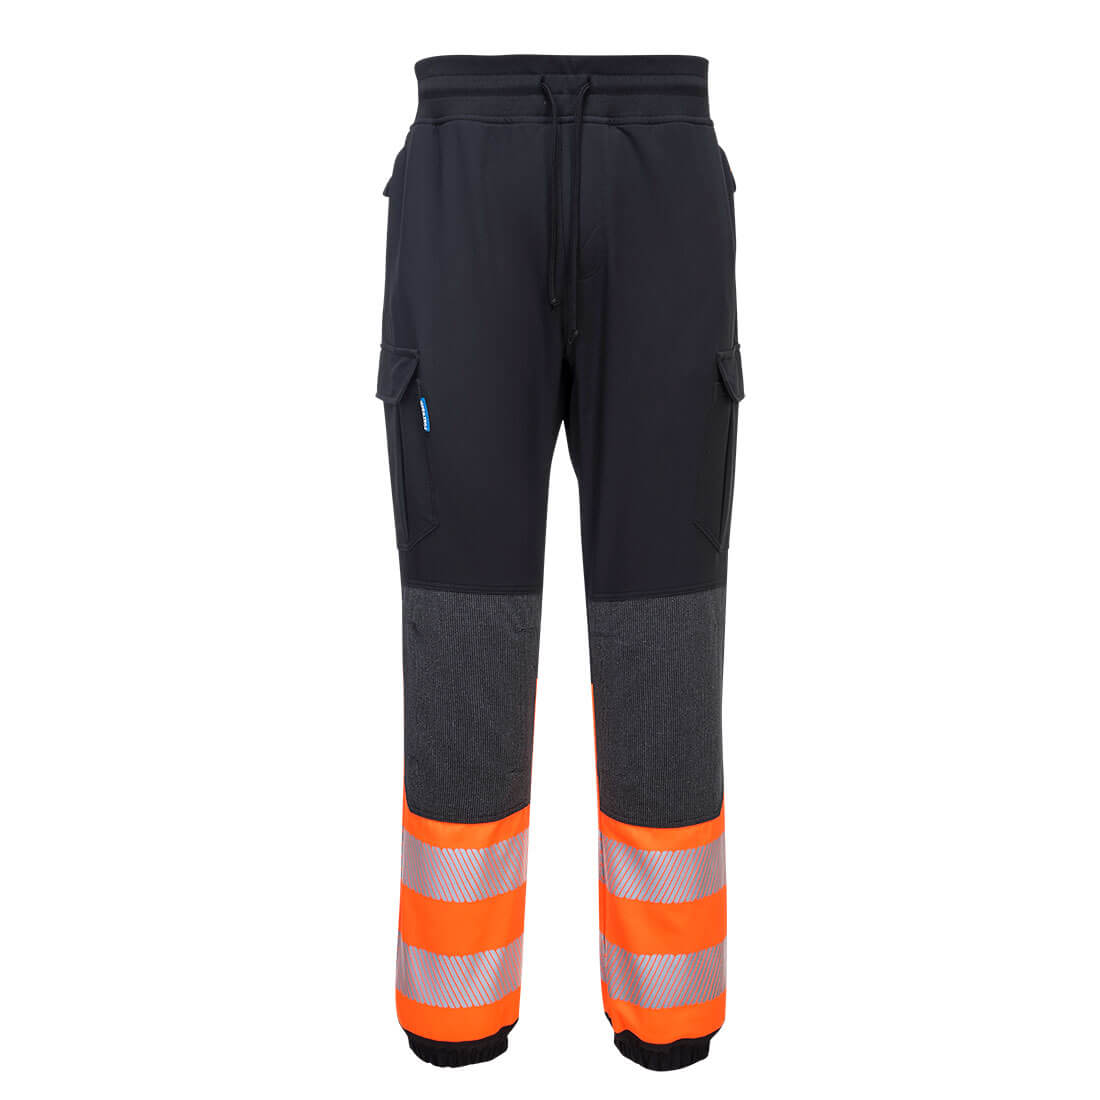 Hi-Vis Soft Trousers with Extremely Comfort and Flexibility